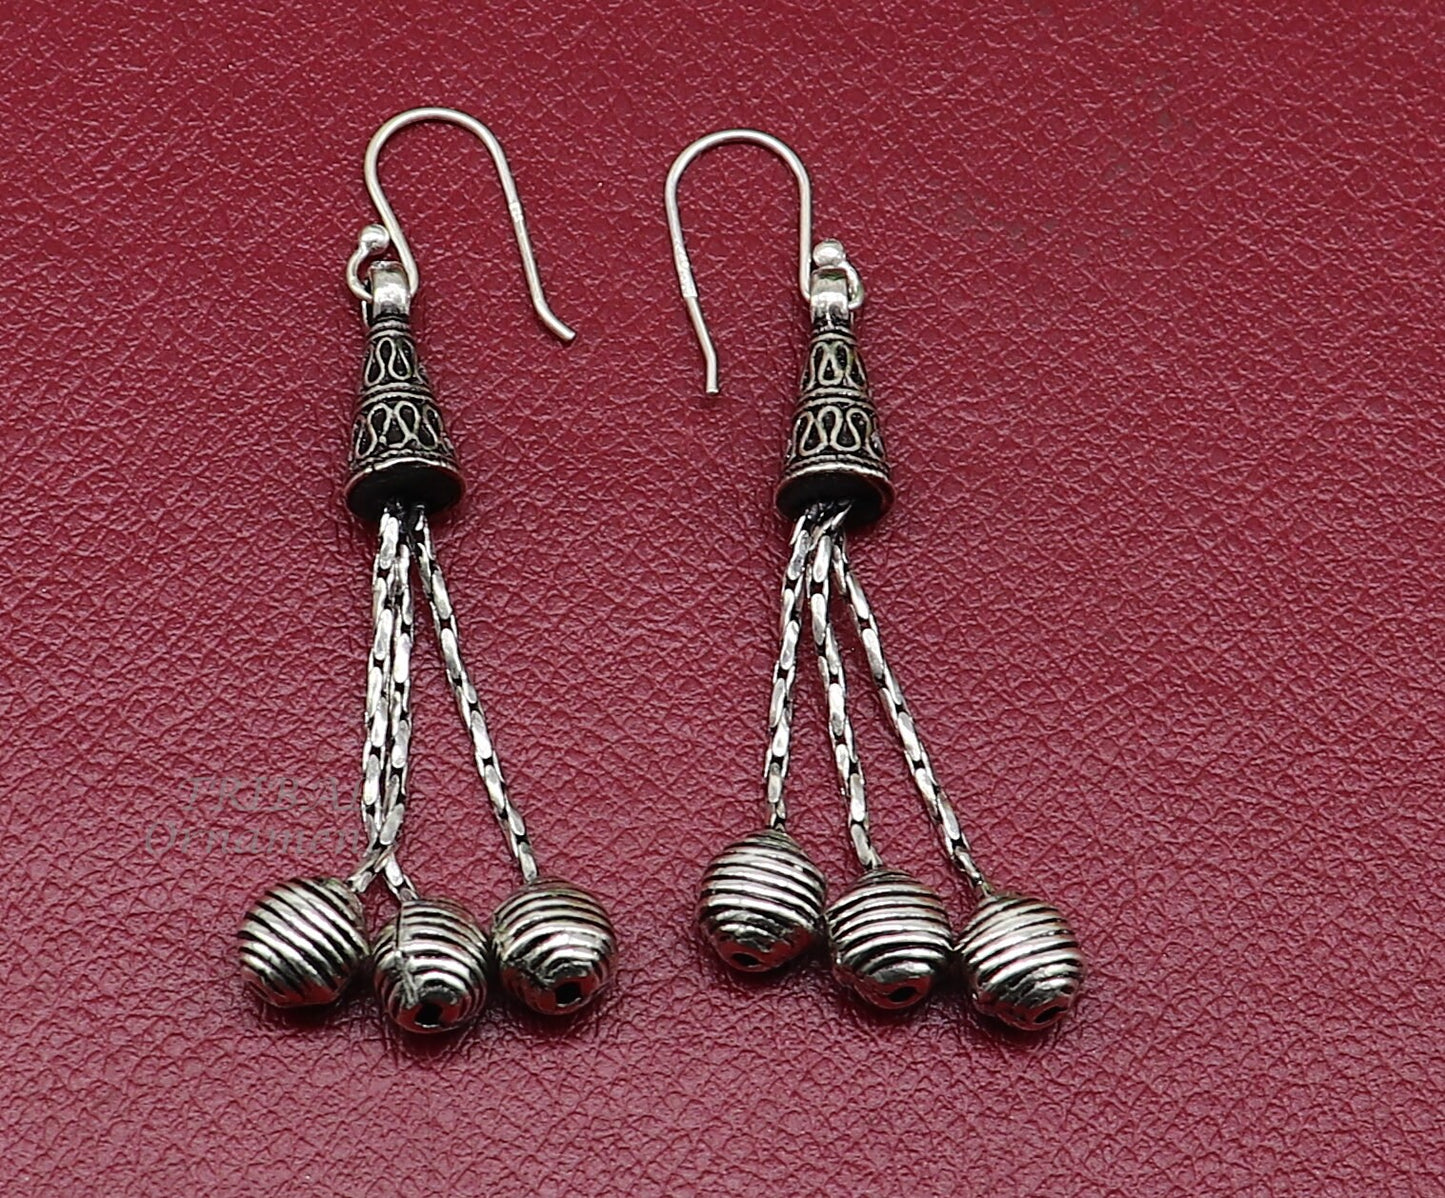 925 sterling silver handmade fabulous Drop dangling hoops earring, stylish customized long earring personalized brides wedding gift s1132 - TRIBAL ORNAMENTS